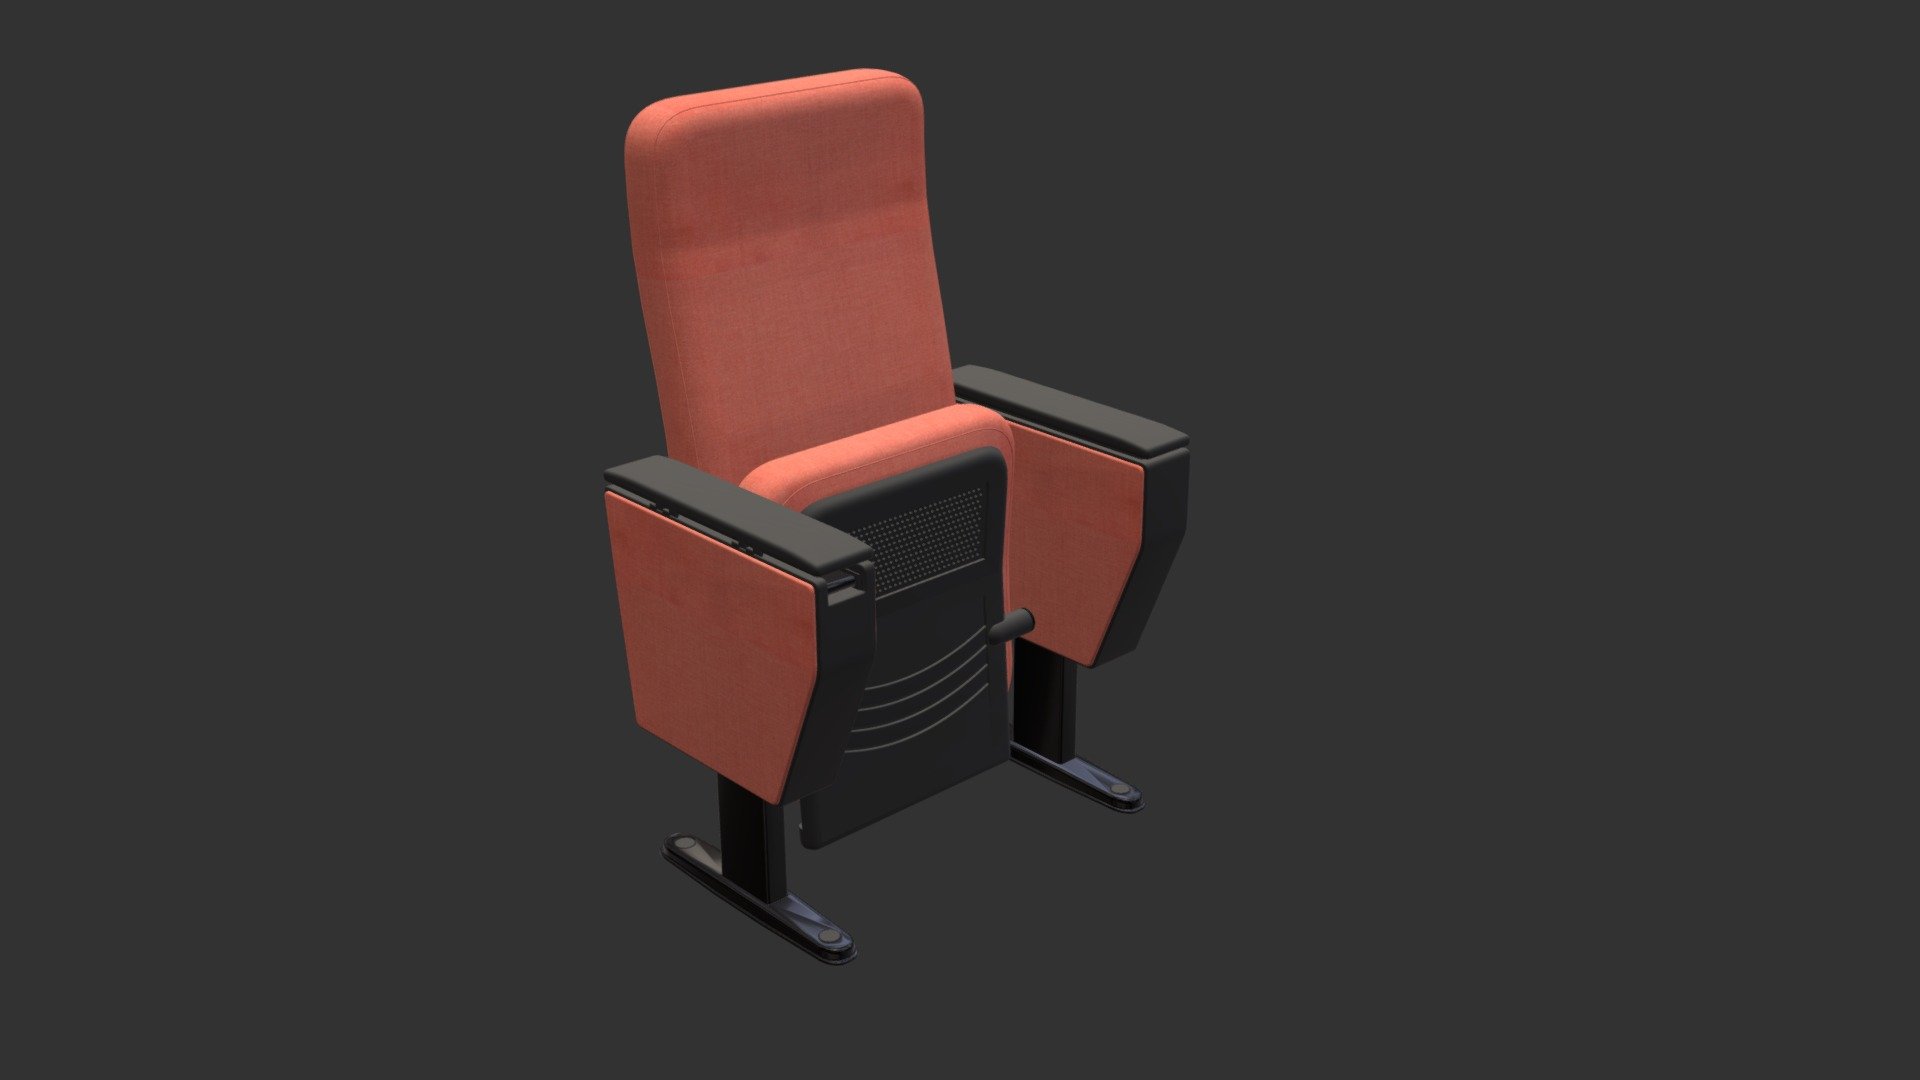 Model generated in 3ds max 2020 with Vray

By DBejarq - Chair Auditorium - 3D model by DBejarq 3d model